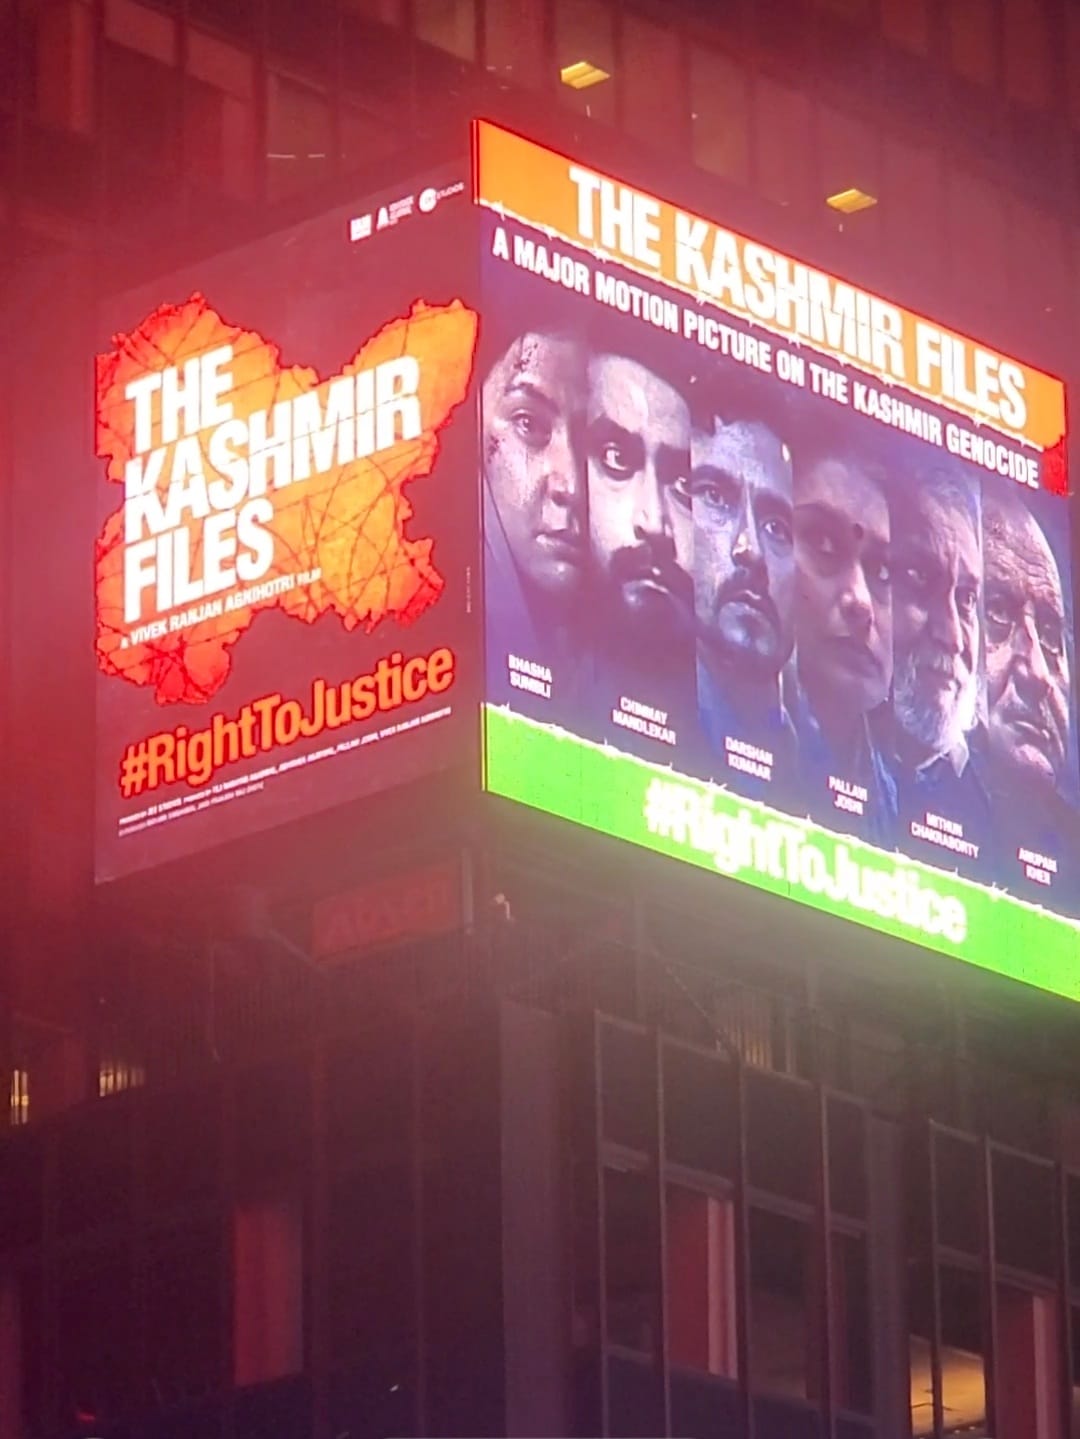 ‘The Kashmir Files’ light up screens at Times Square on Republic Day